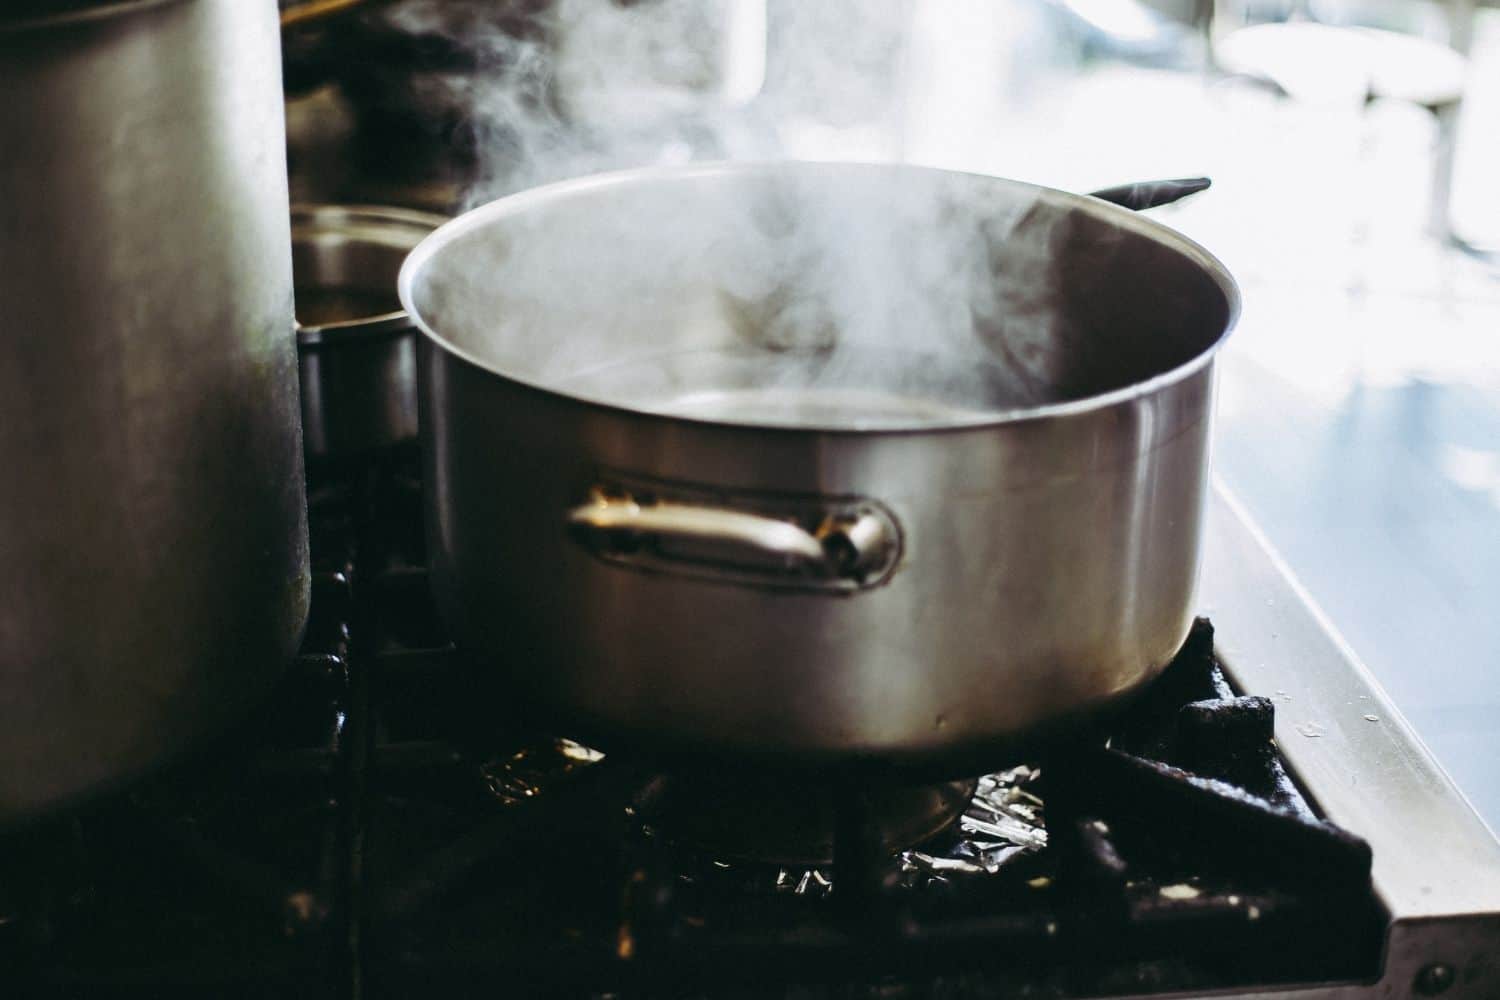 How to boil and what does it mean to boil when cooking?